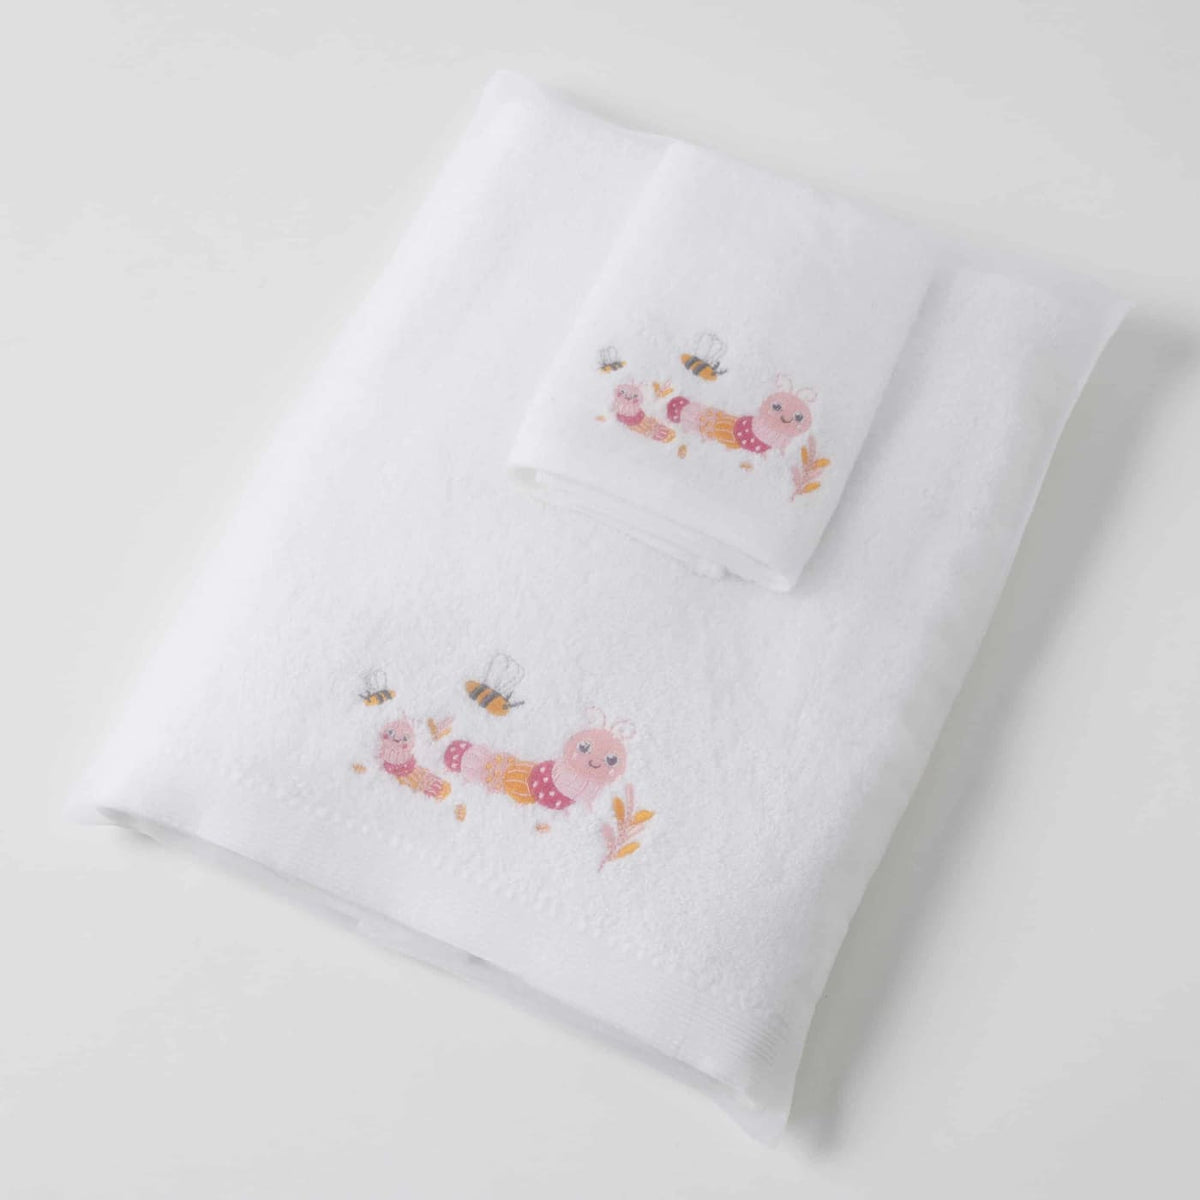 Jiggle &amp; Giggle Towel &amp; Face Washer Set in Organza Bag - Little Critters Pink - Little Critters Pink - BATHTIME &amp; CHANGING - TOWELS/WASHERS